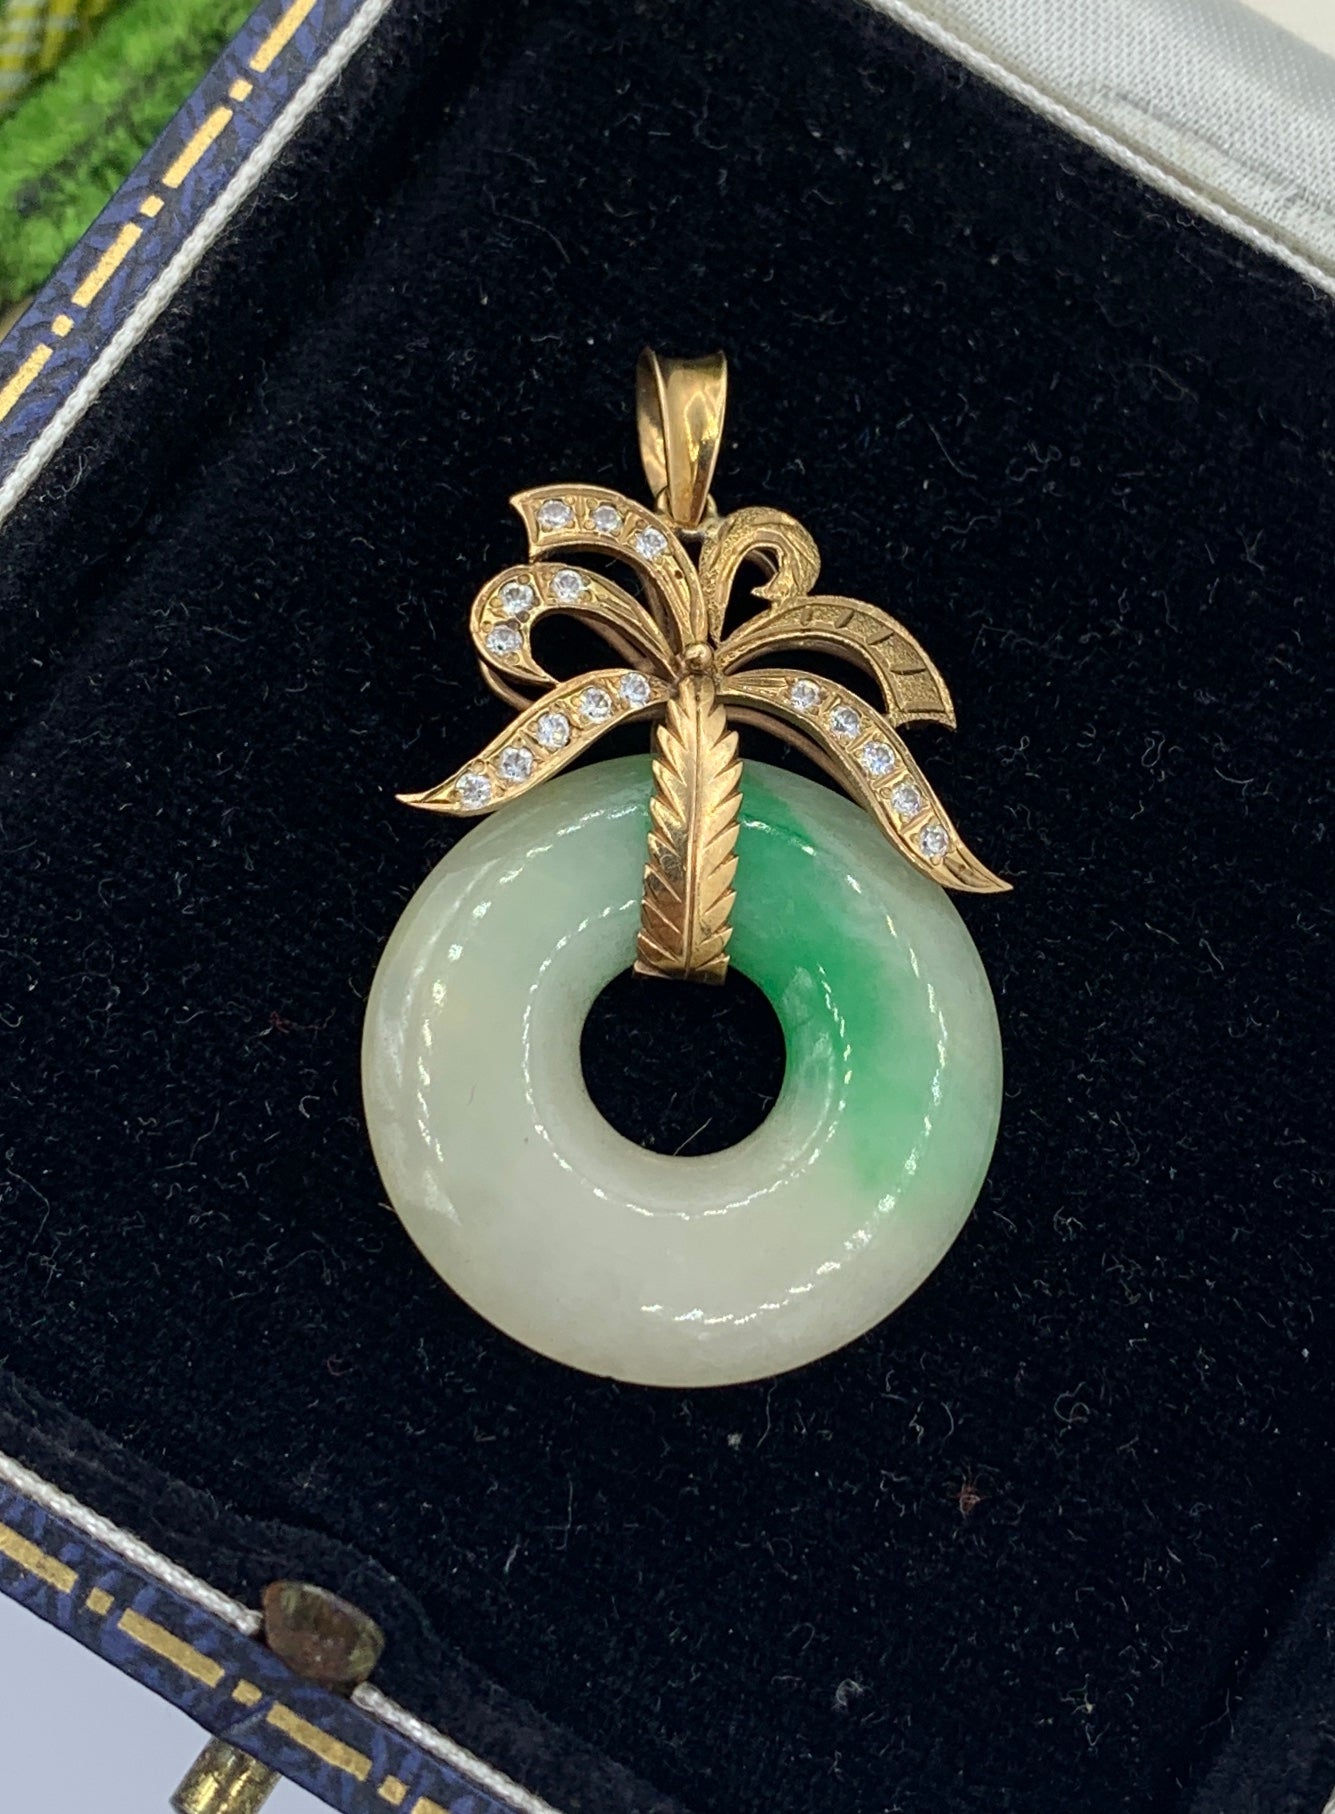 This is a spectacular Antique Jade Diamond Pendant Necklace in 14 Karat Yellow Gold.   The stunning pendant has a round Jade disc with wonderful color variation.  The Jade disc hangs from a surmount in 14 Karat Yellow Gold which is set with 16